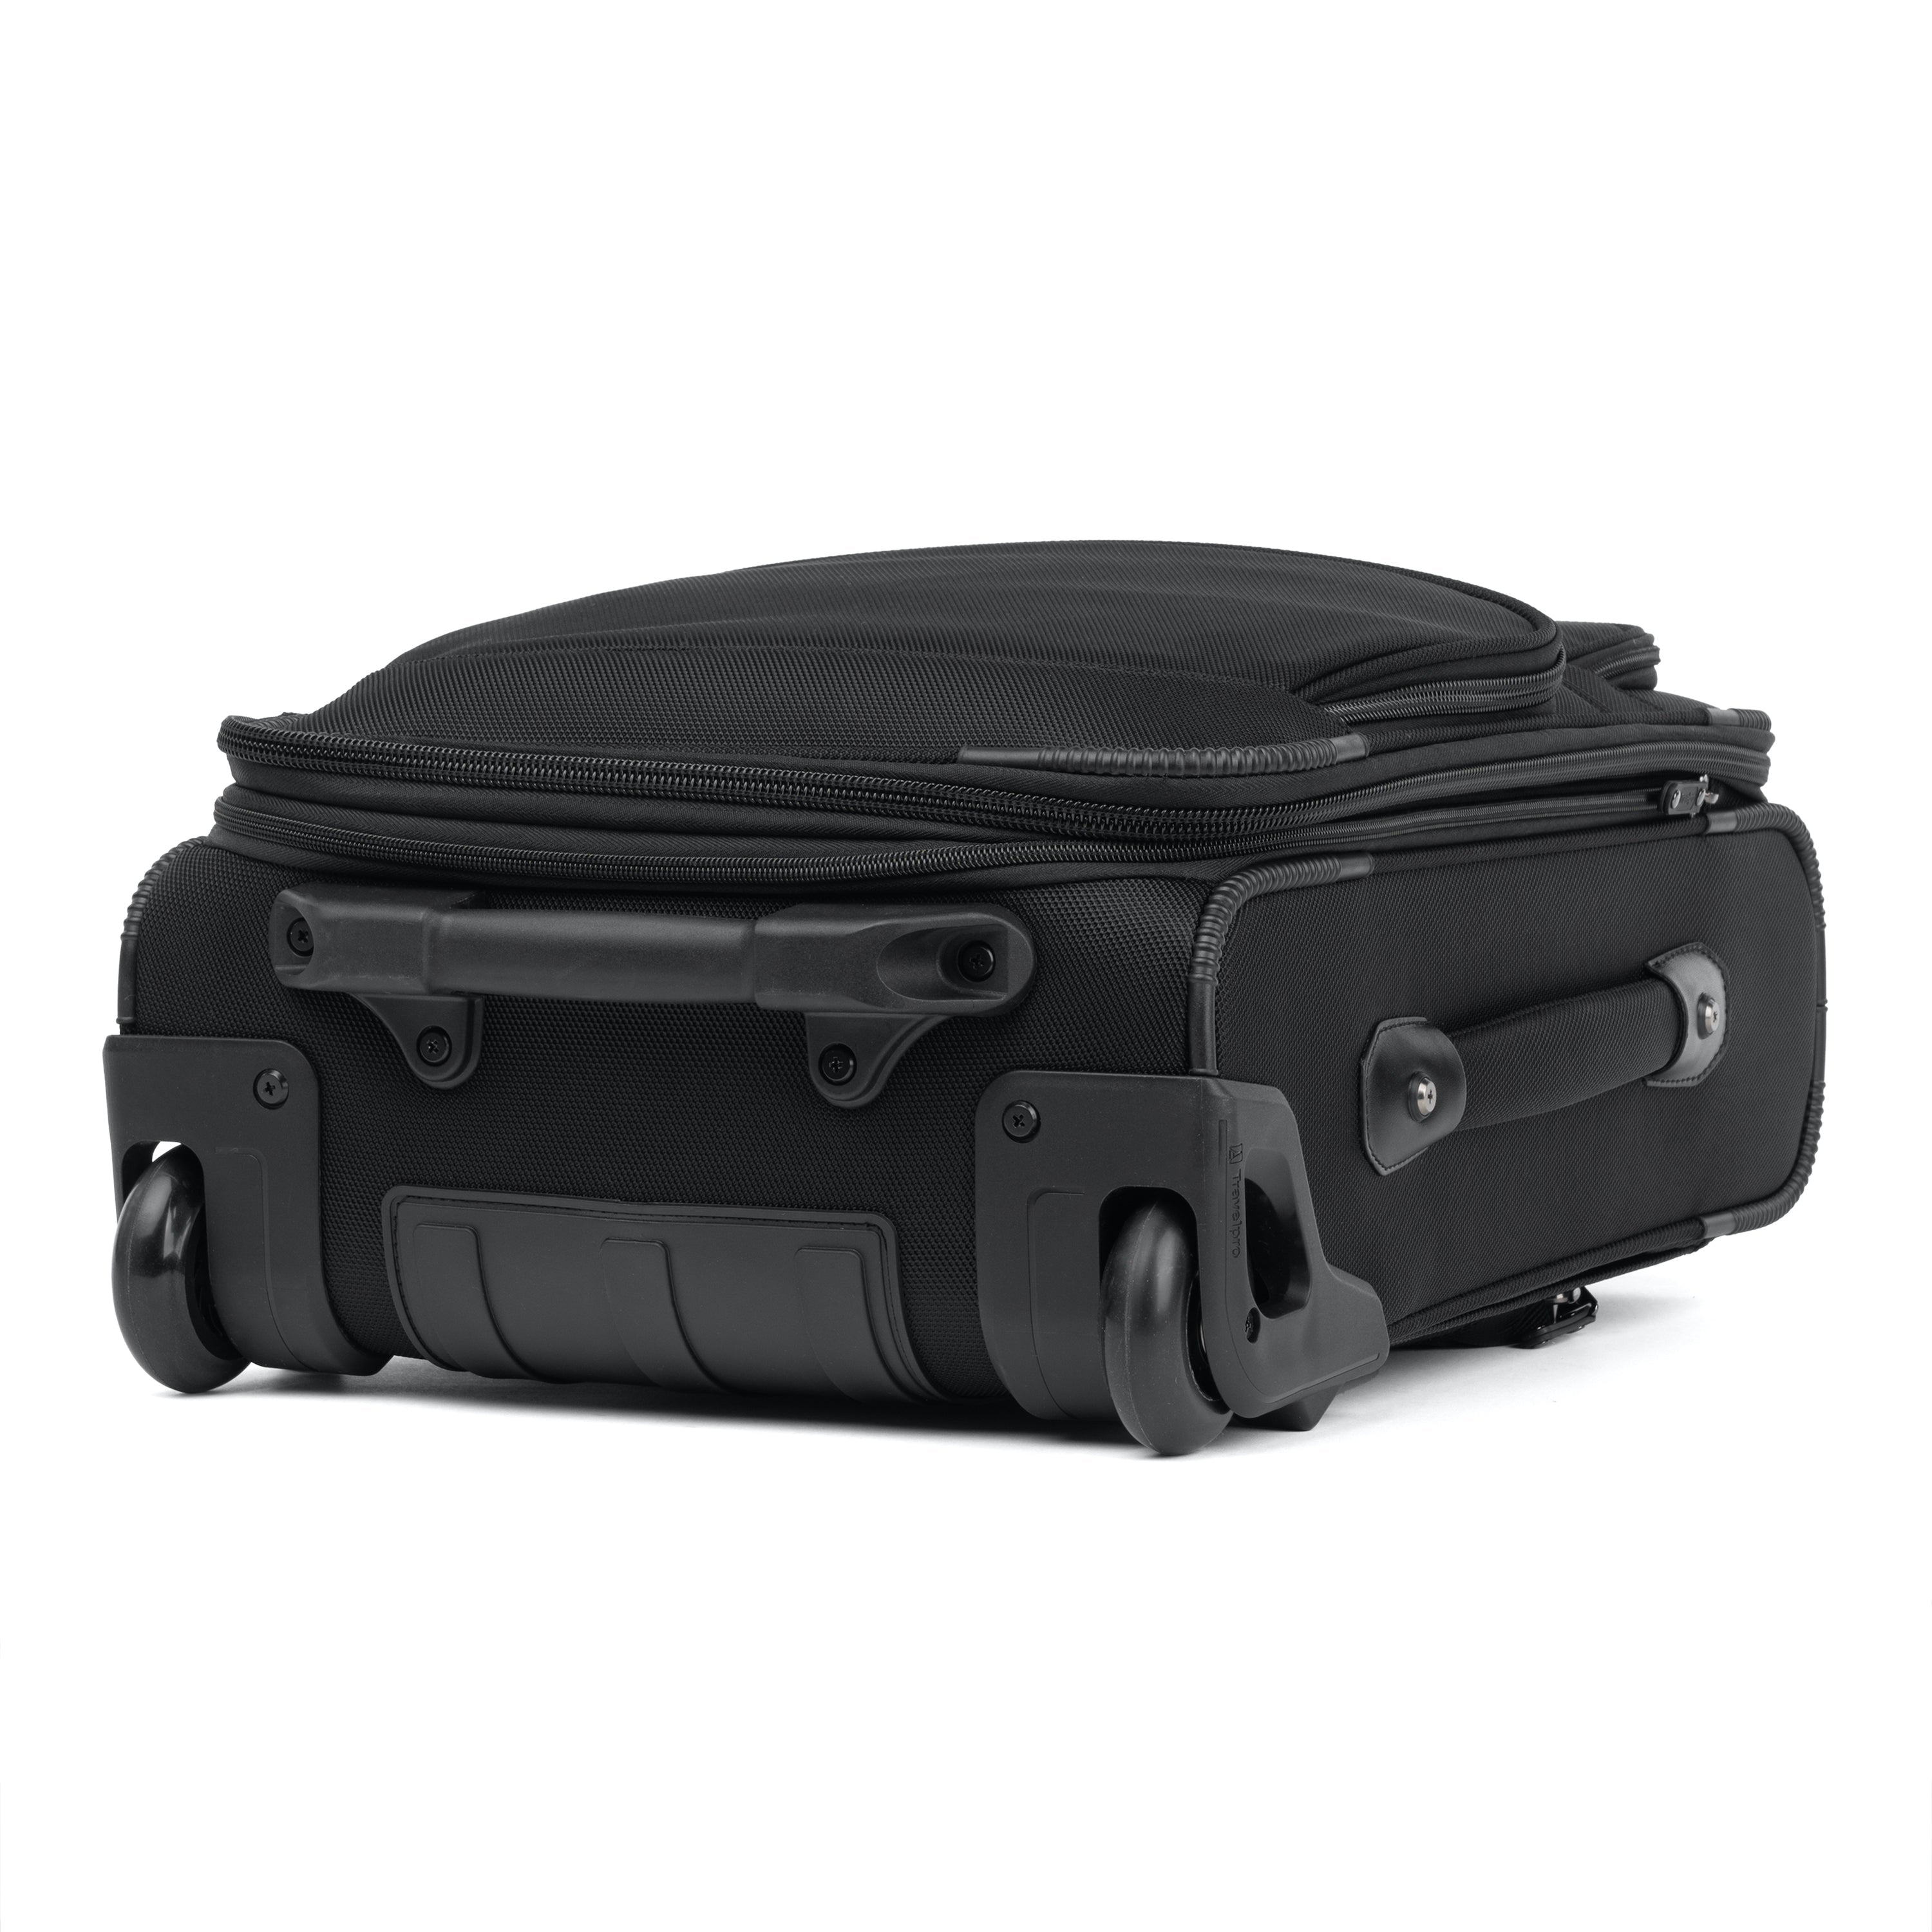 TRAVELPRO CREW VERSAPACK GLOBAL CARRY ON EXPANDABLE ROLLABOARD BLACK –  Altman Luggage